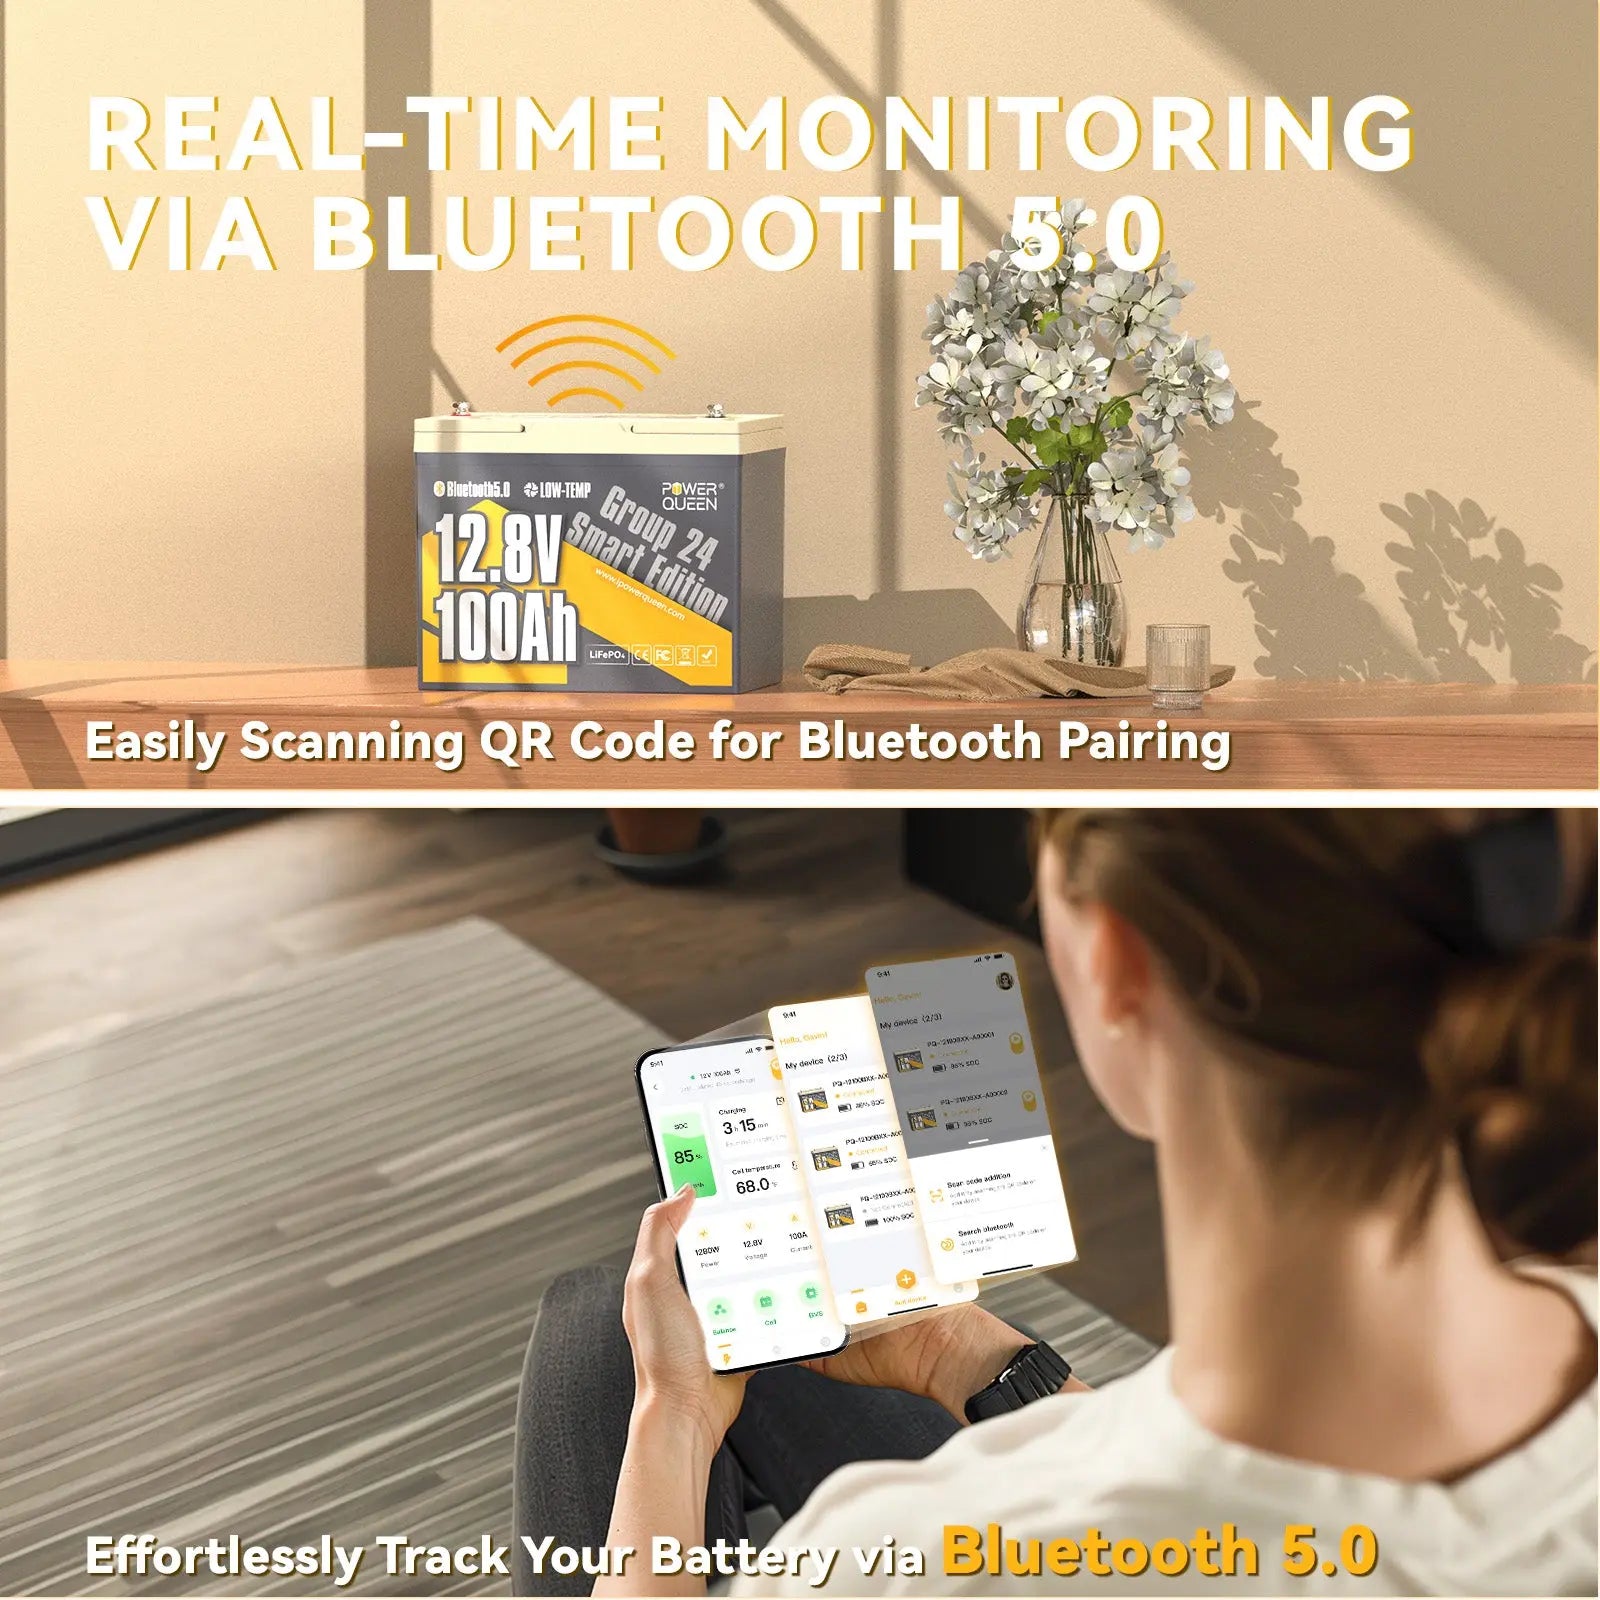 real-time monitoring via bluetooth 5.0